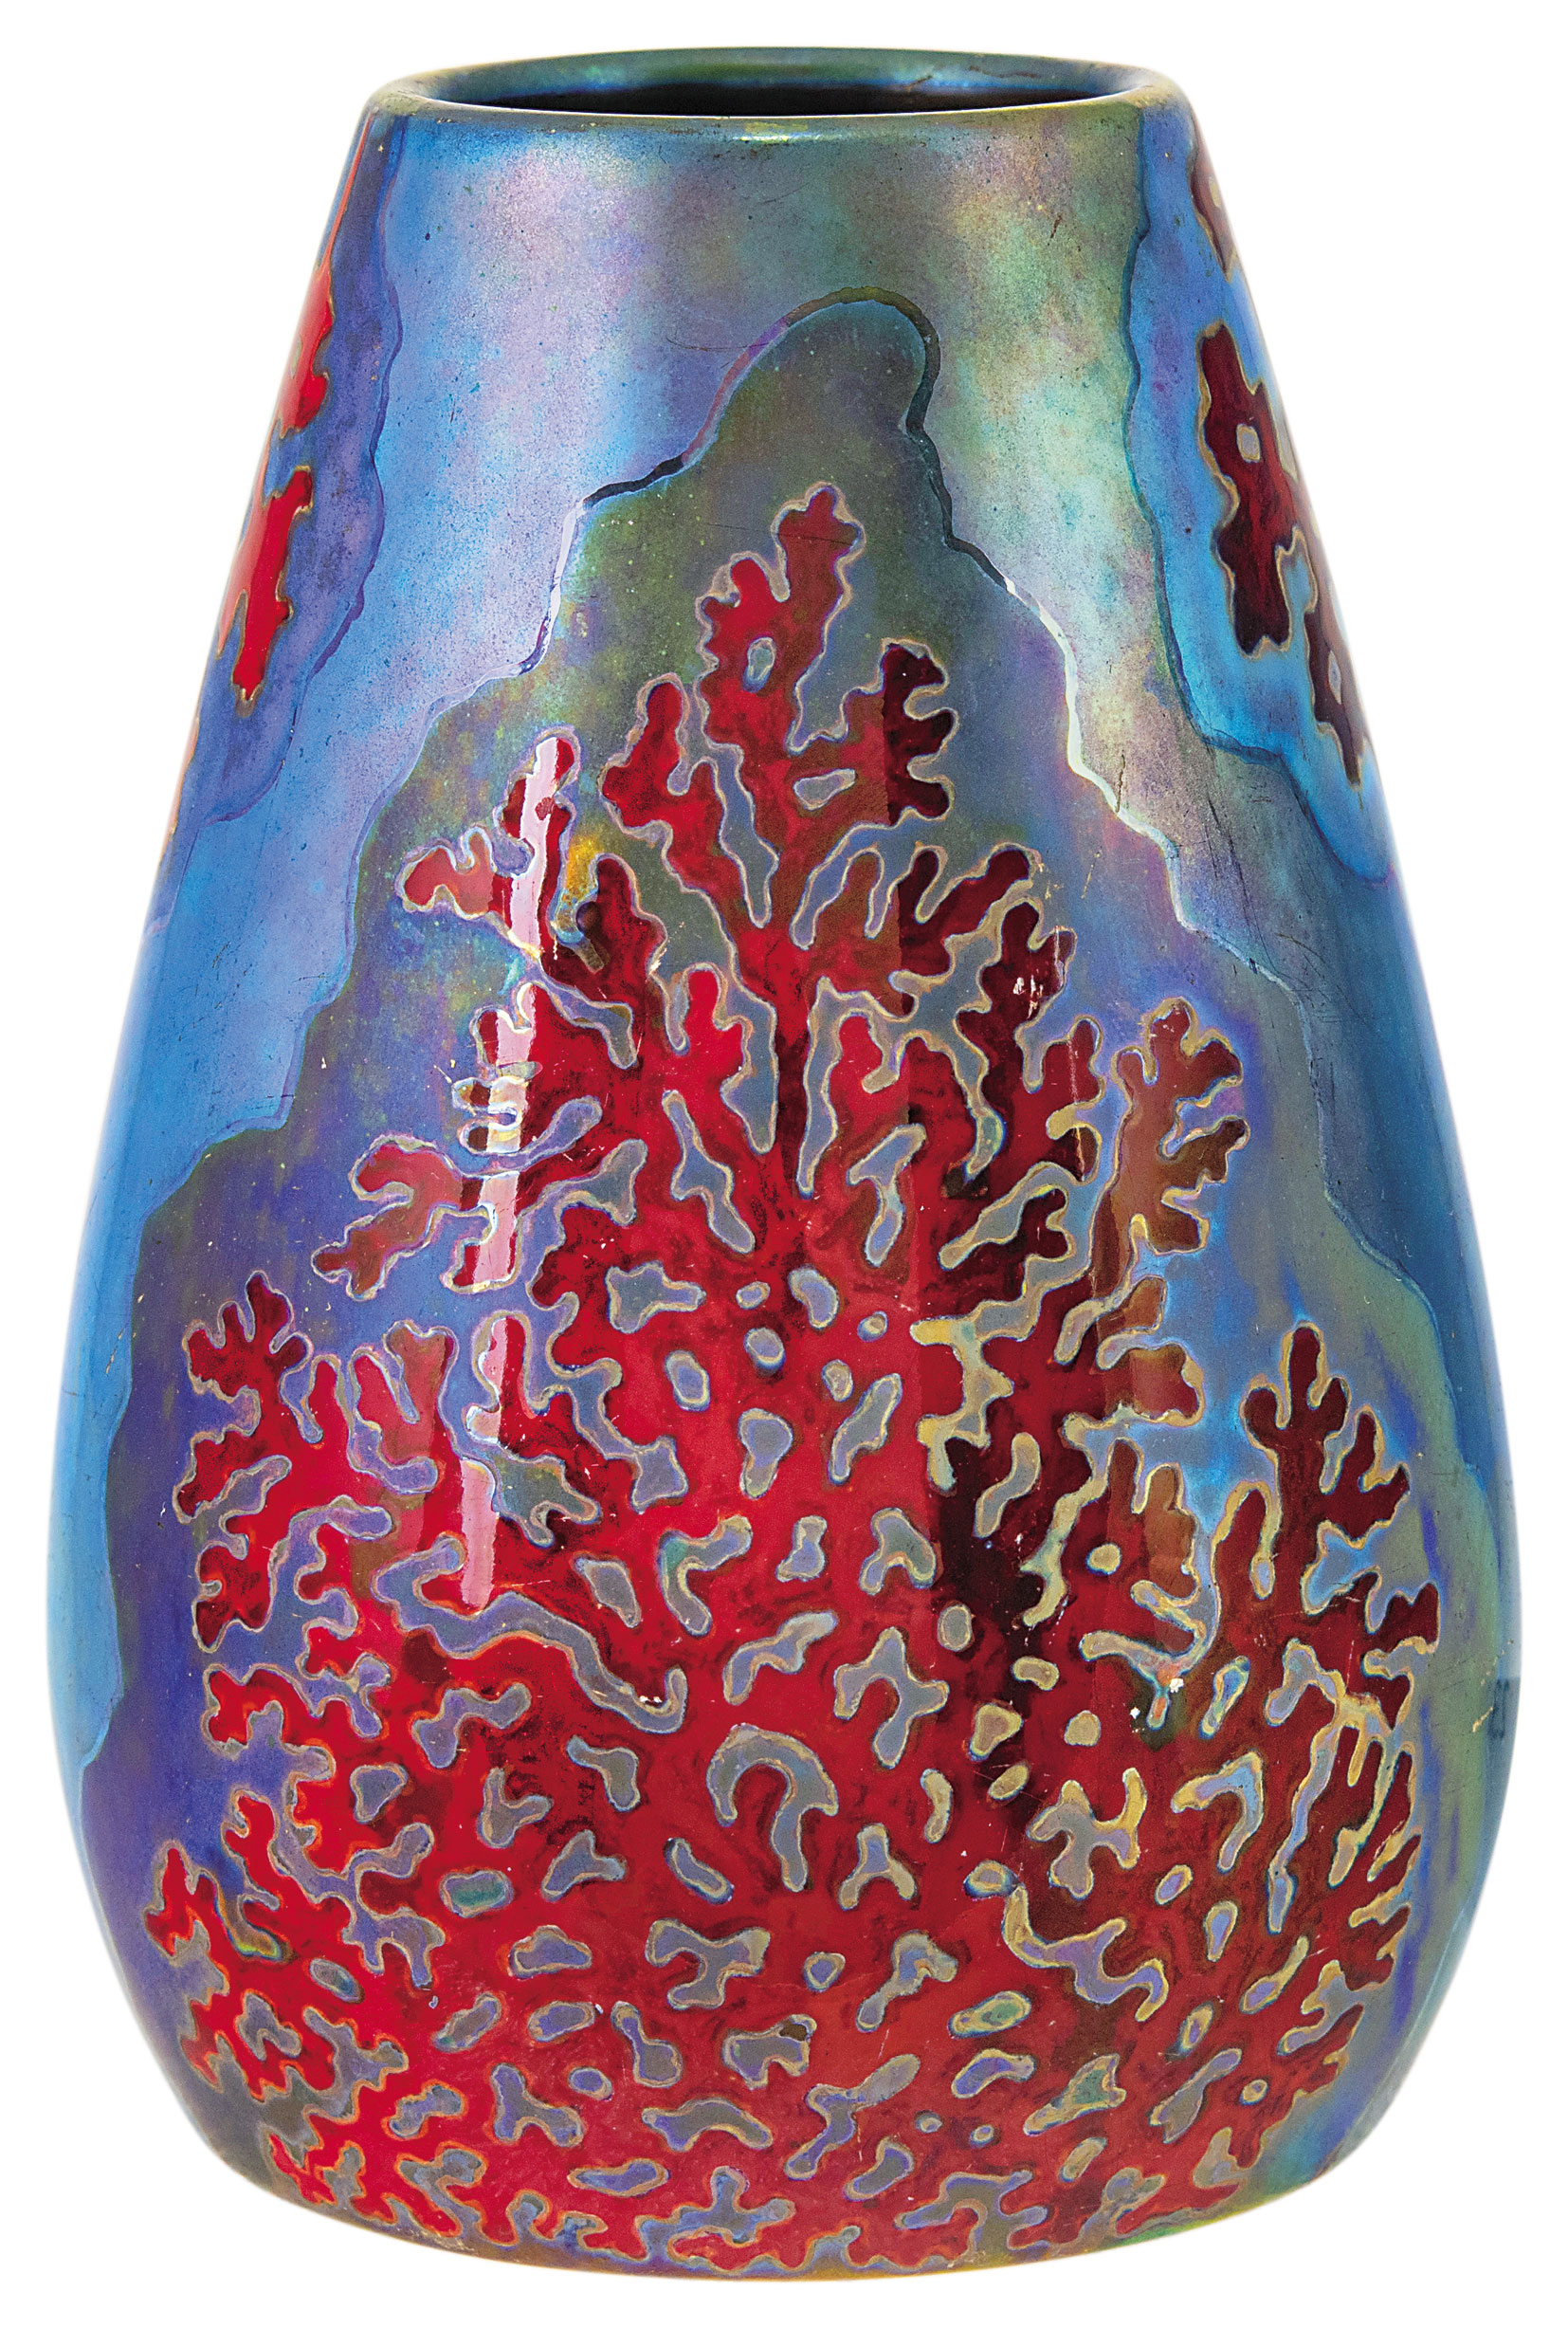 Zsolnay Vase with Coral decoration, 1897-1898